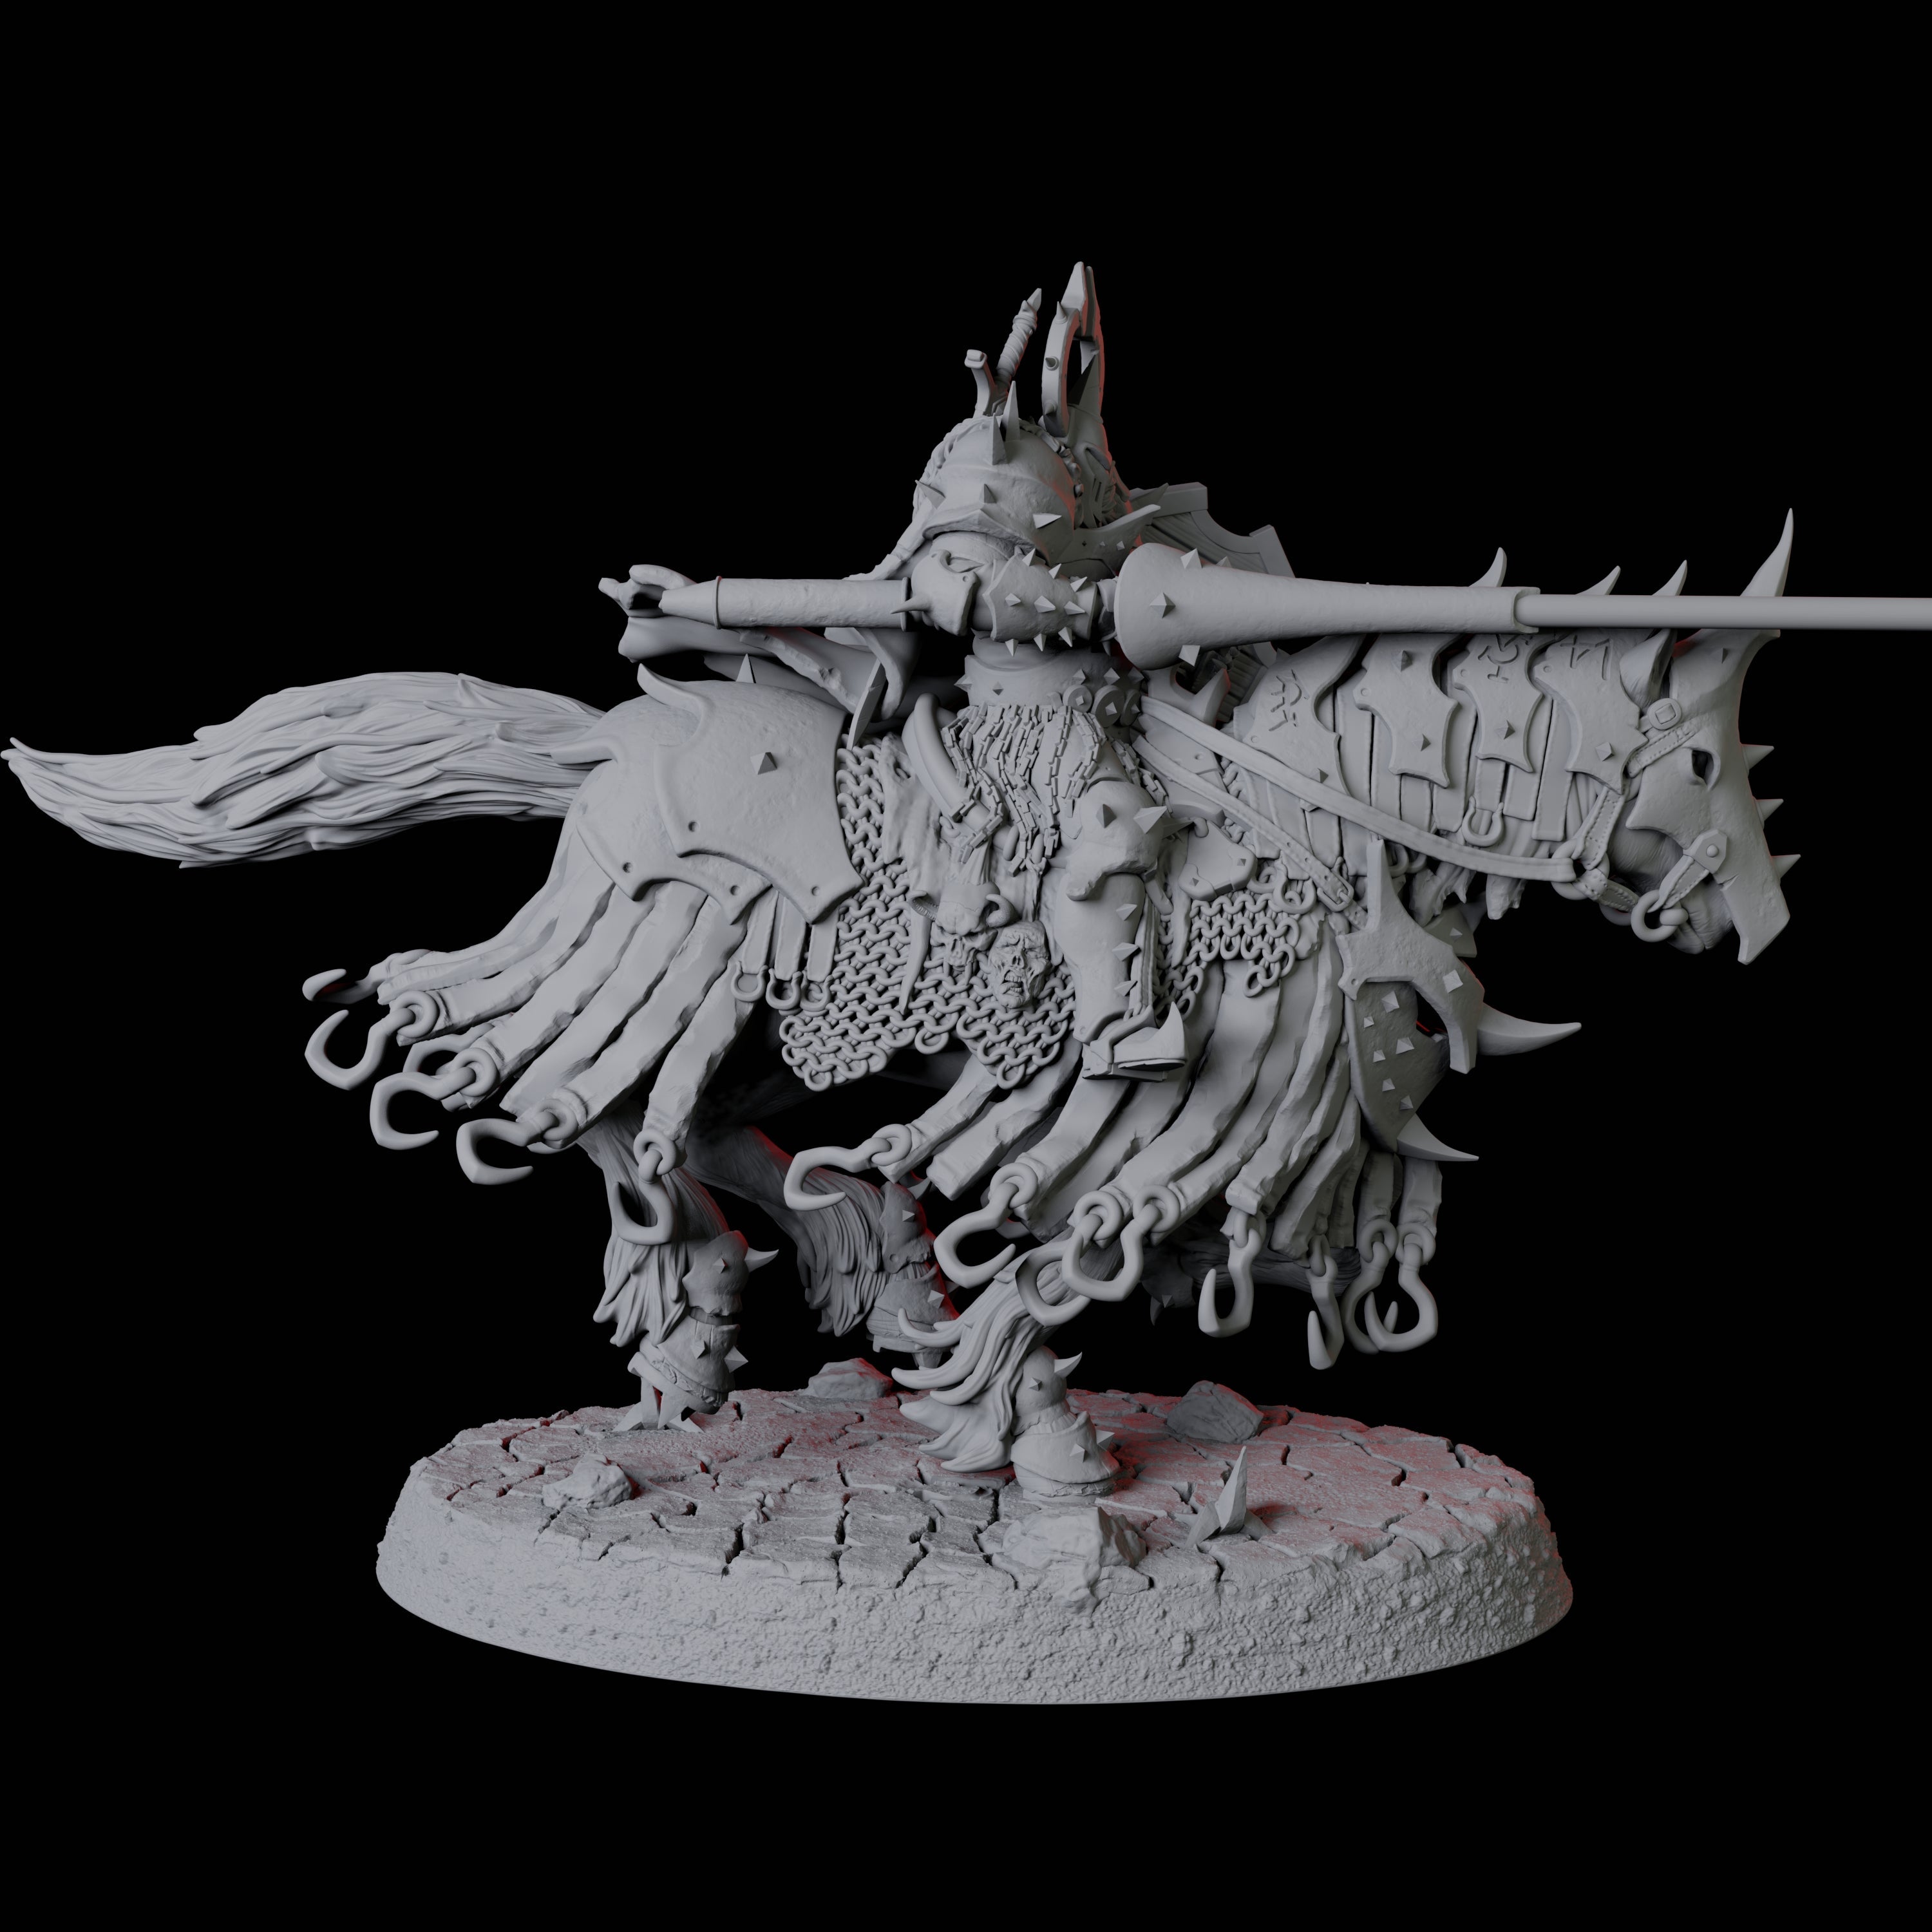 Charging Knight A Miniature for Dungeons and Dragons, Pathfinder or other TTRPGs